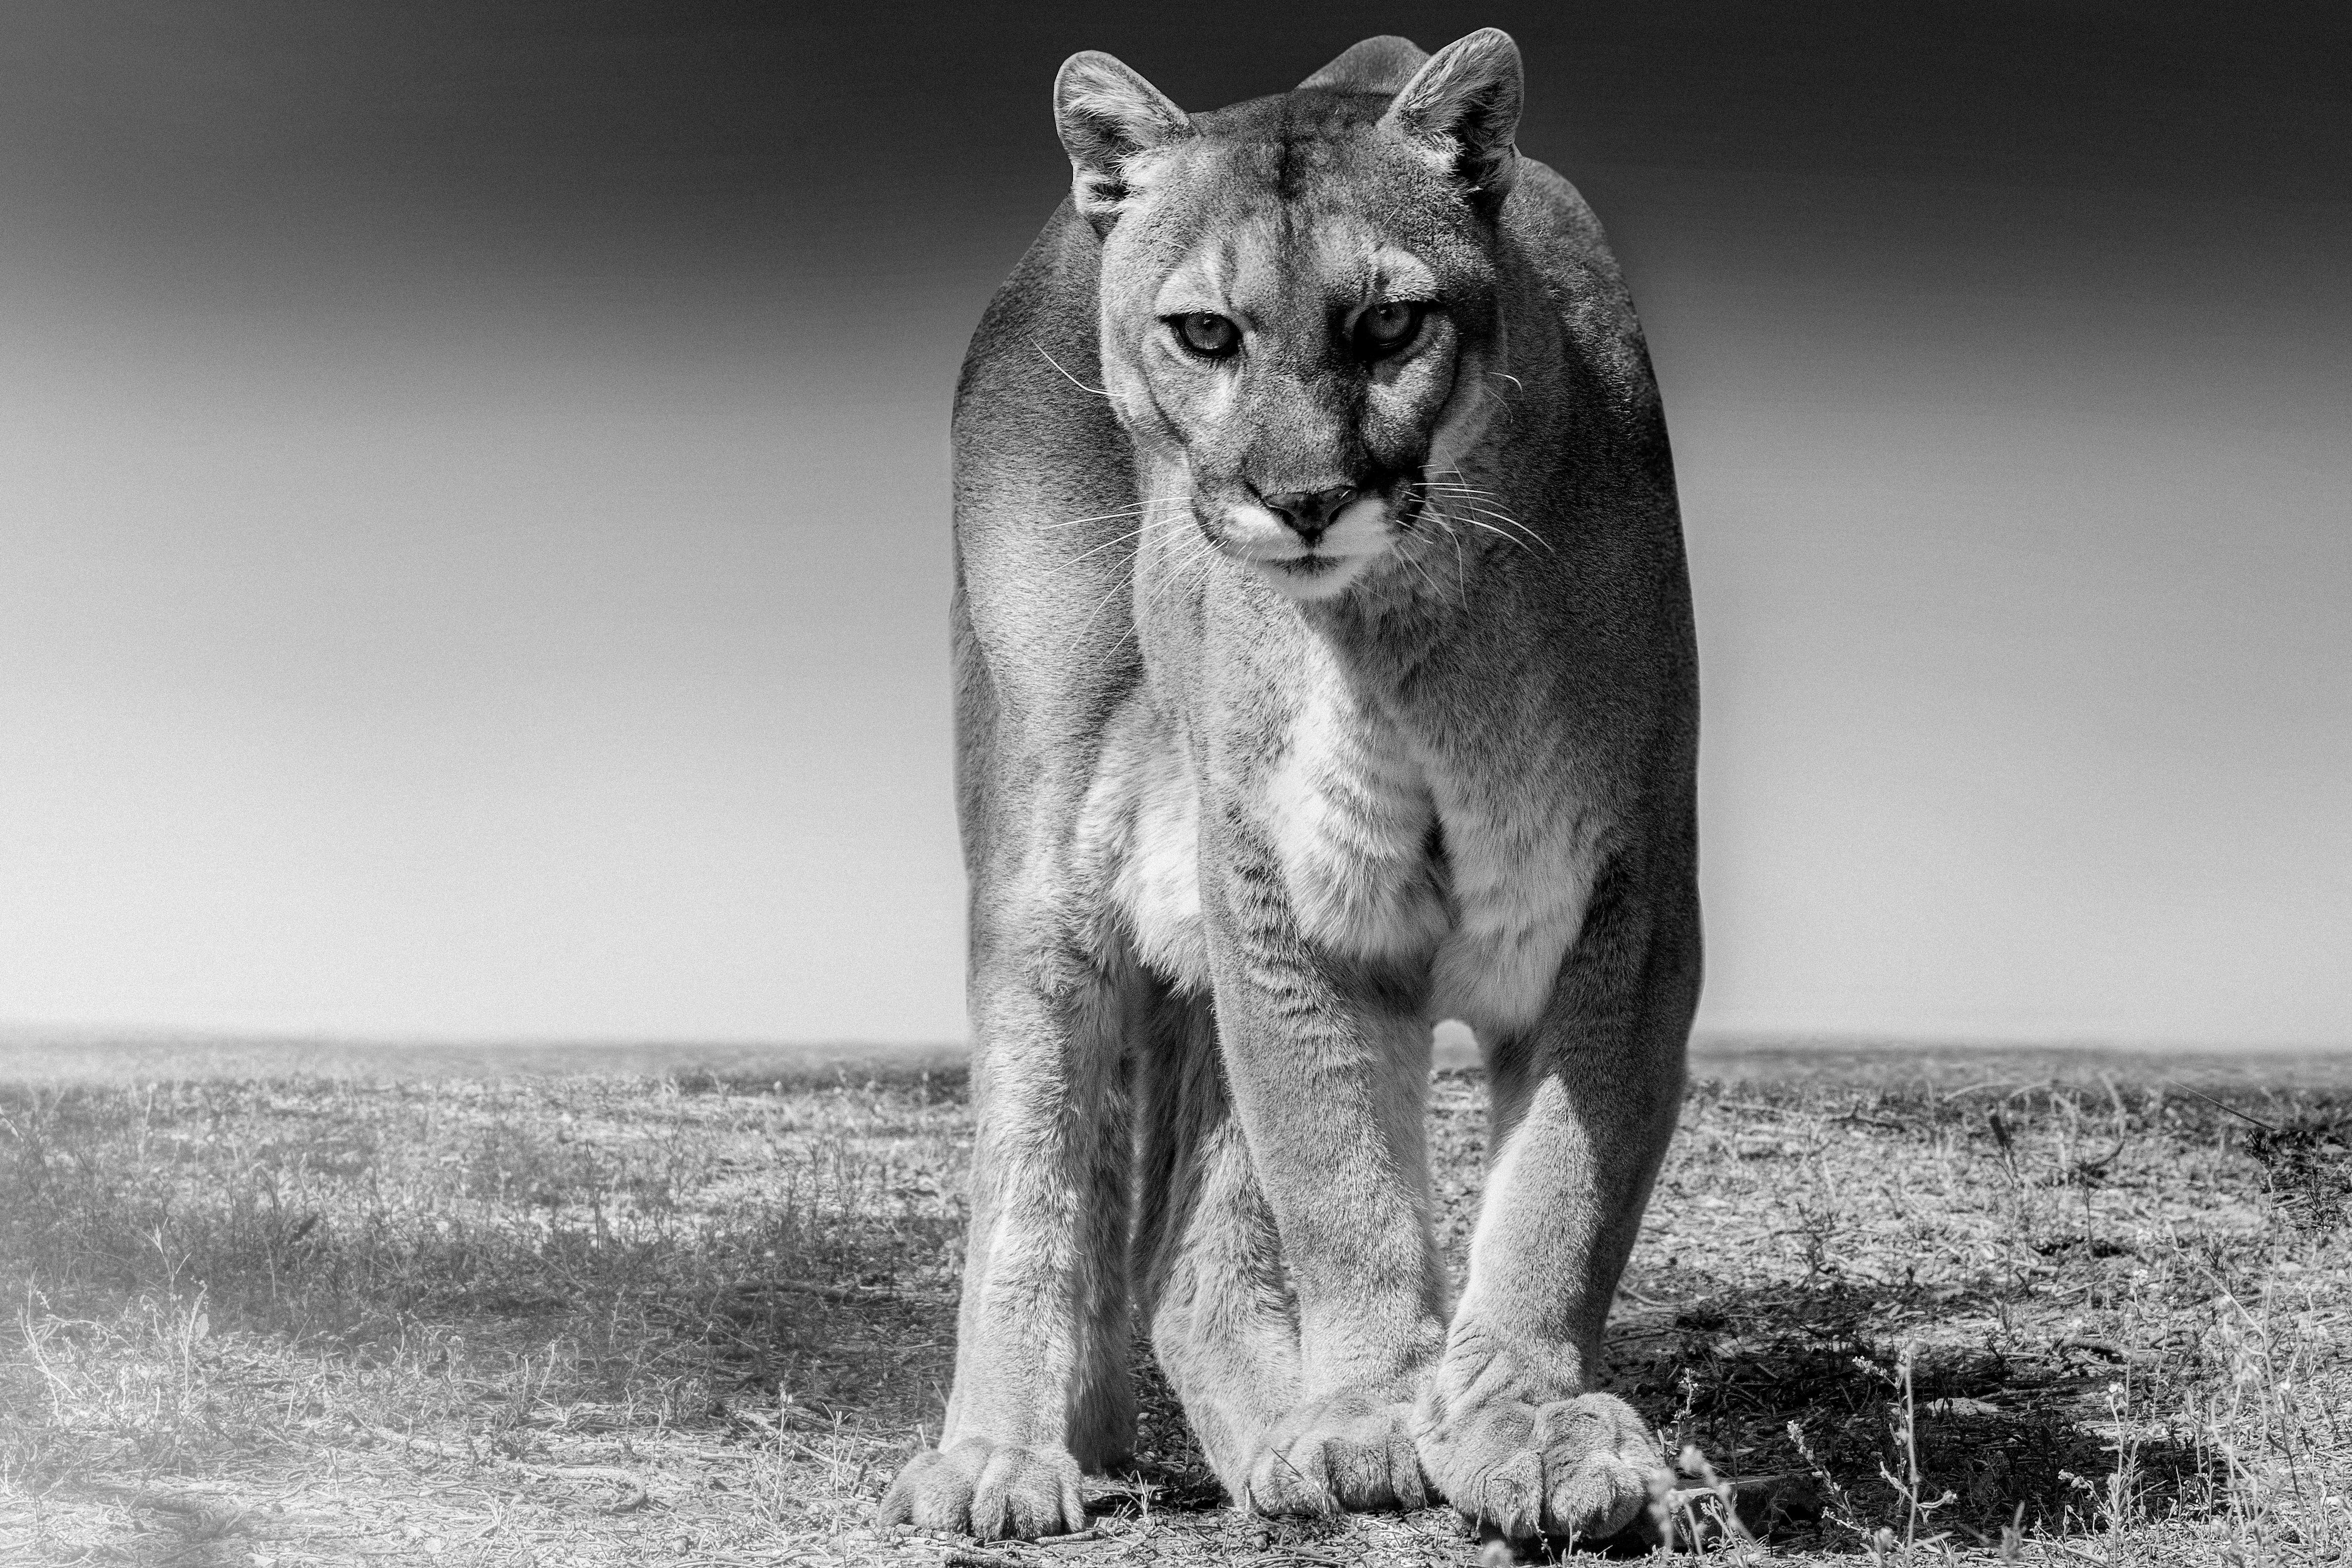 Shane Russeck Black and White Photograph - Cougar Print 20x30 - Fine Art Photography of Mountain Lion